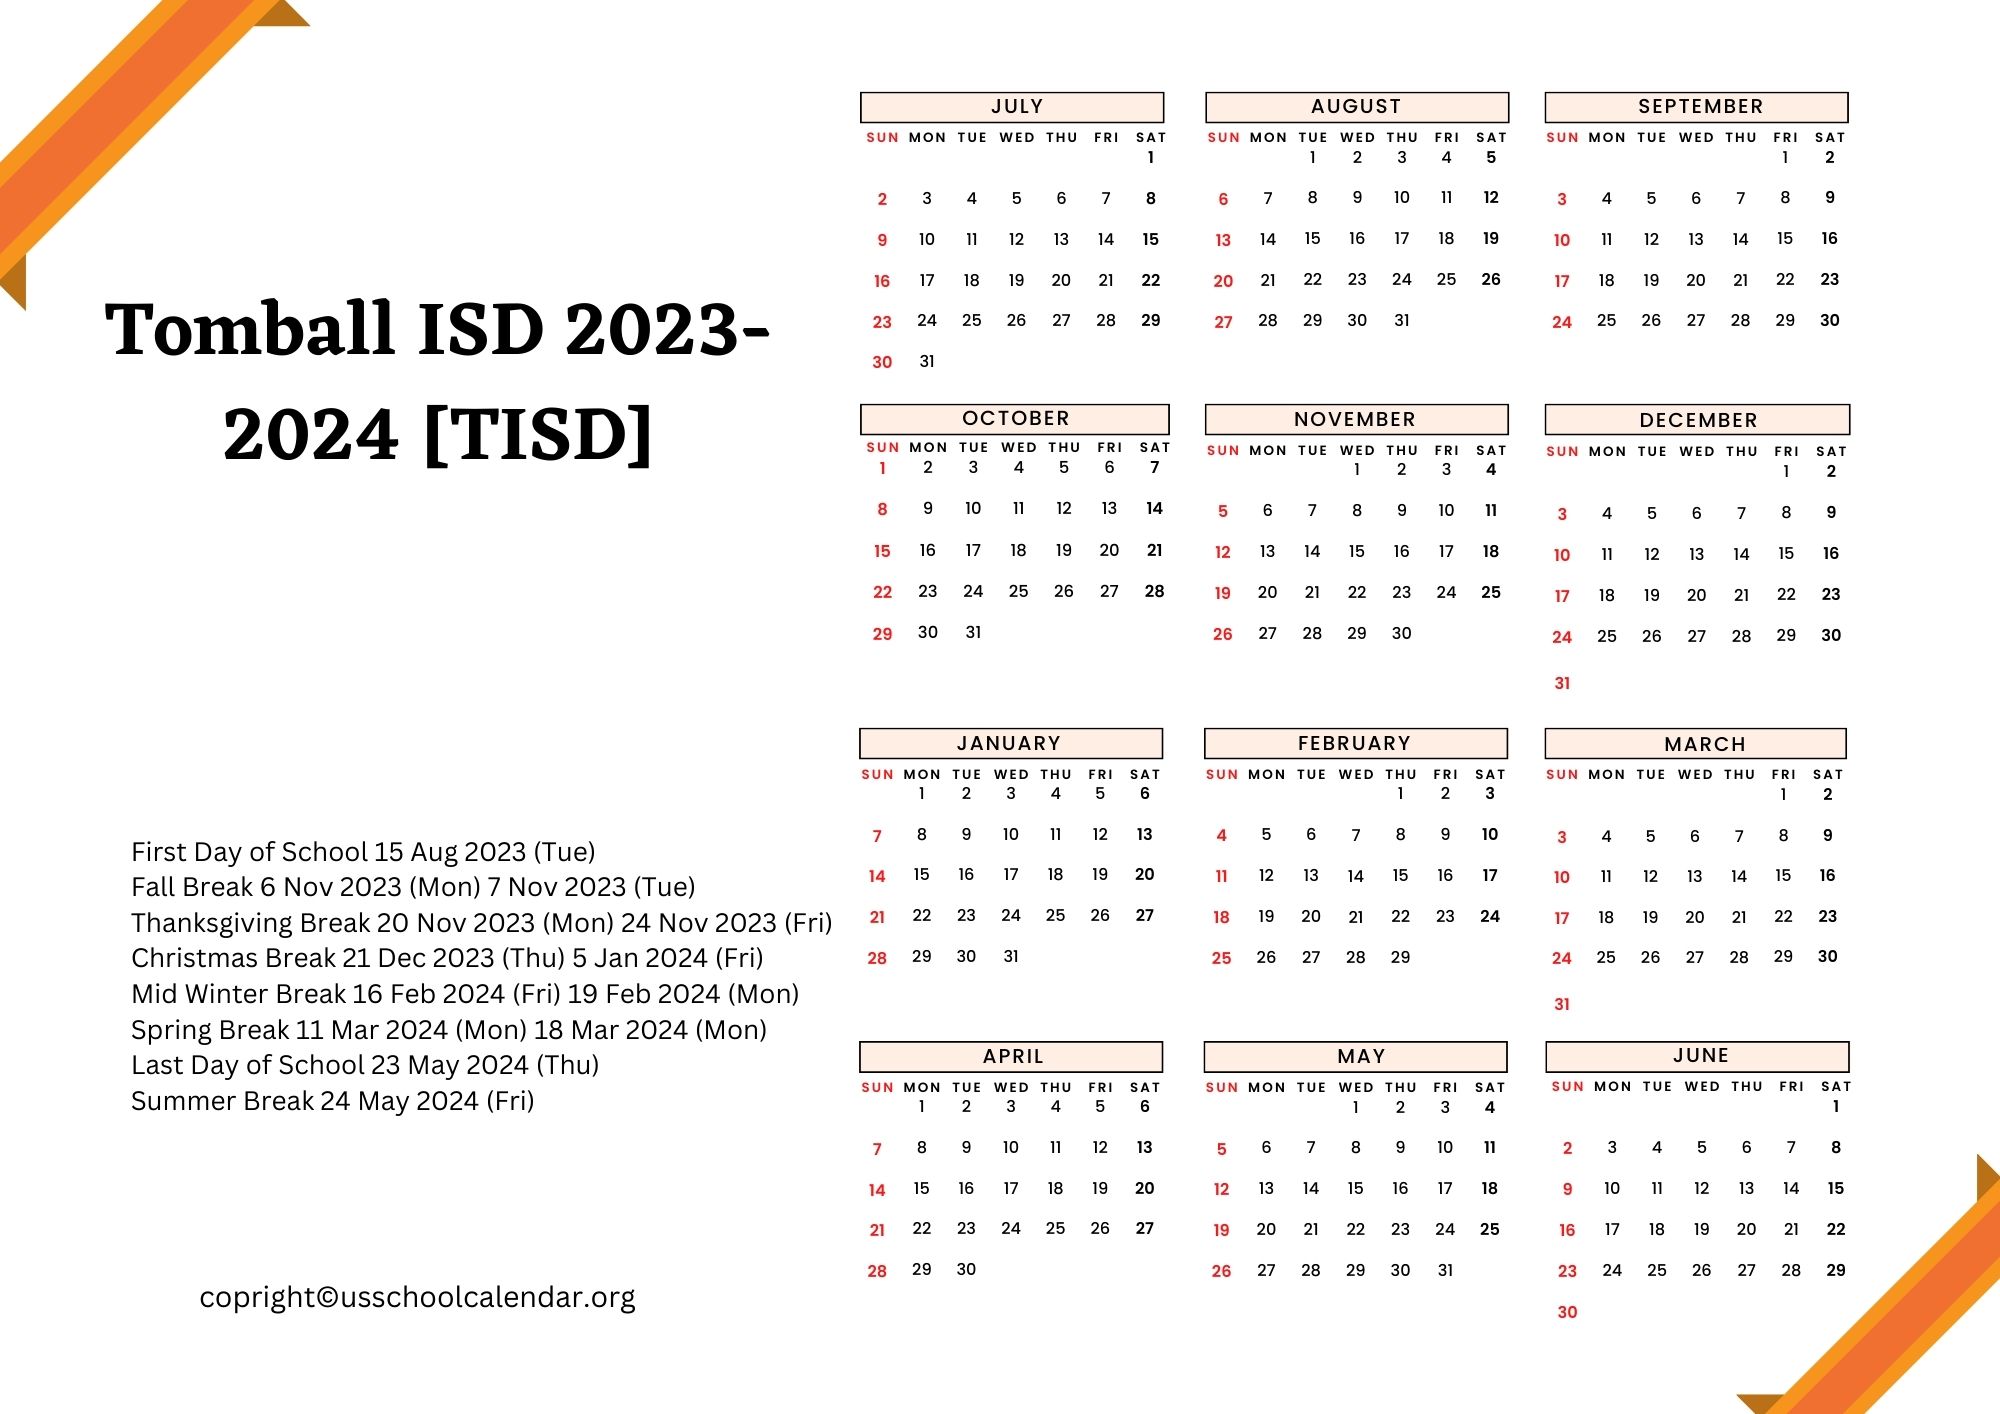 Tomball ISD Calendar with Holidays 2023 2024 TISD